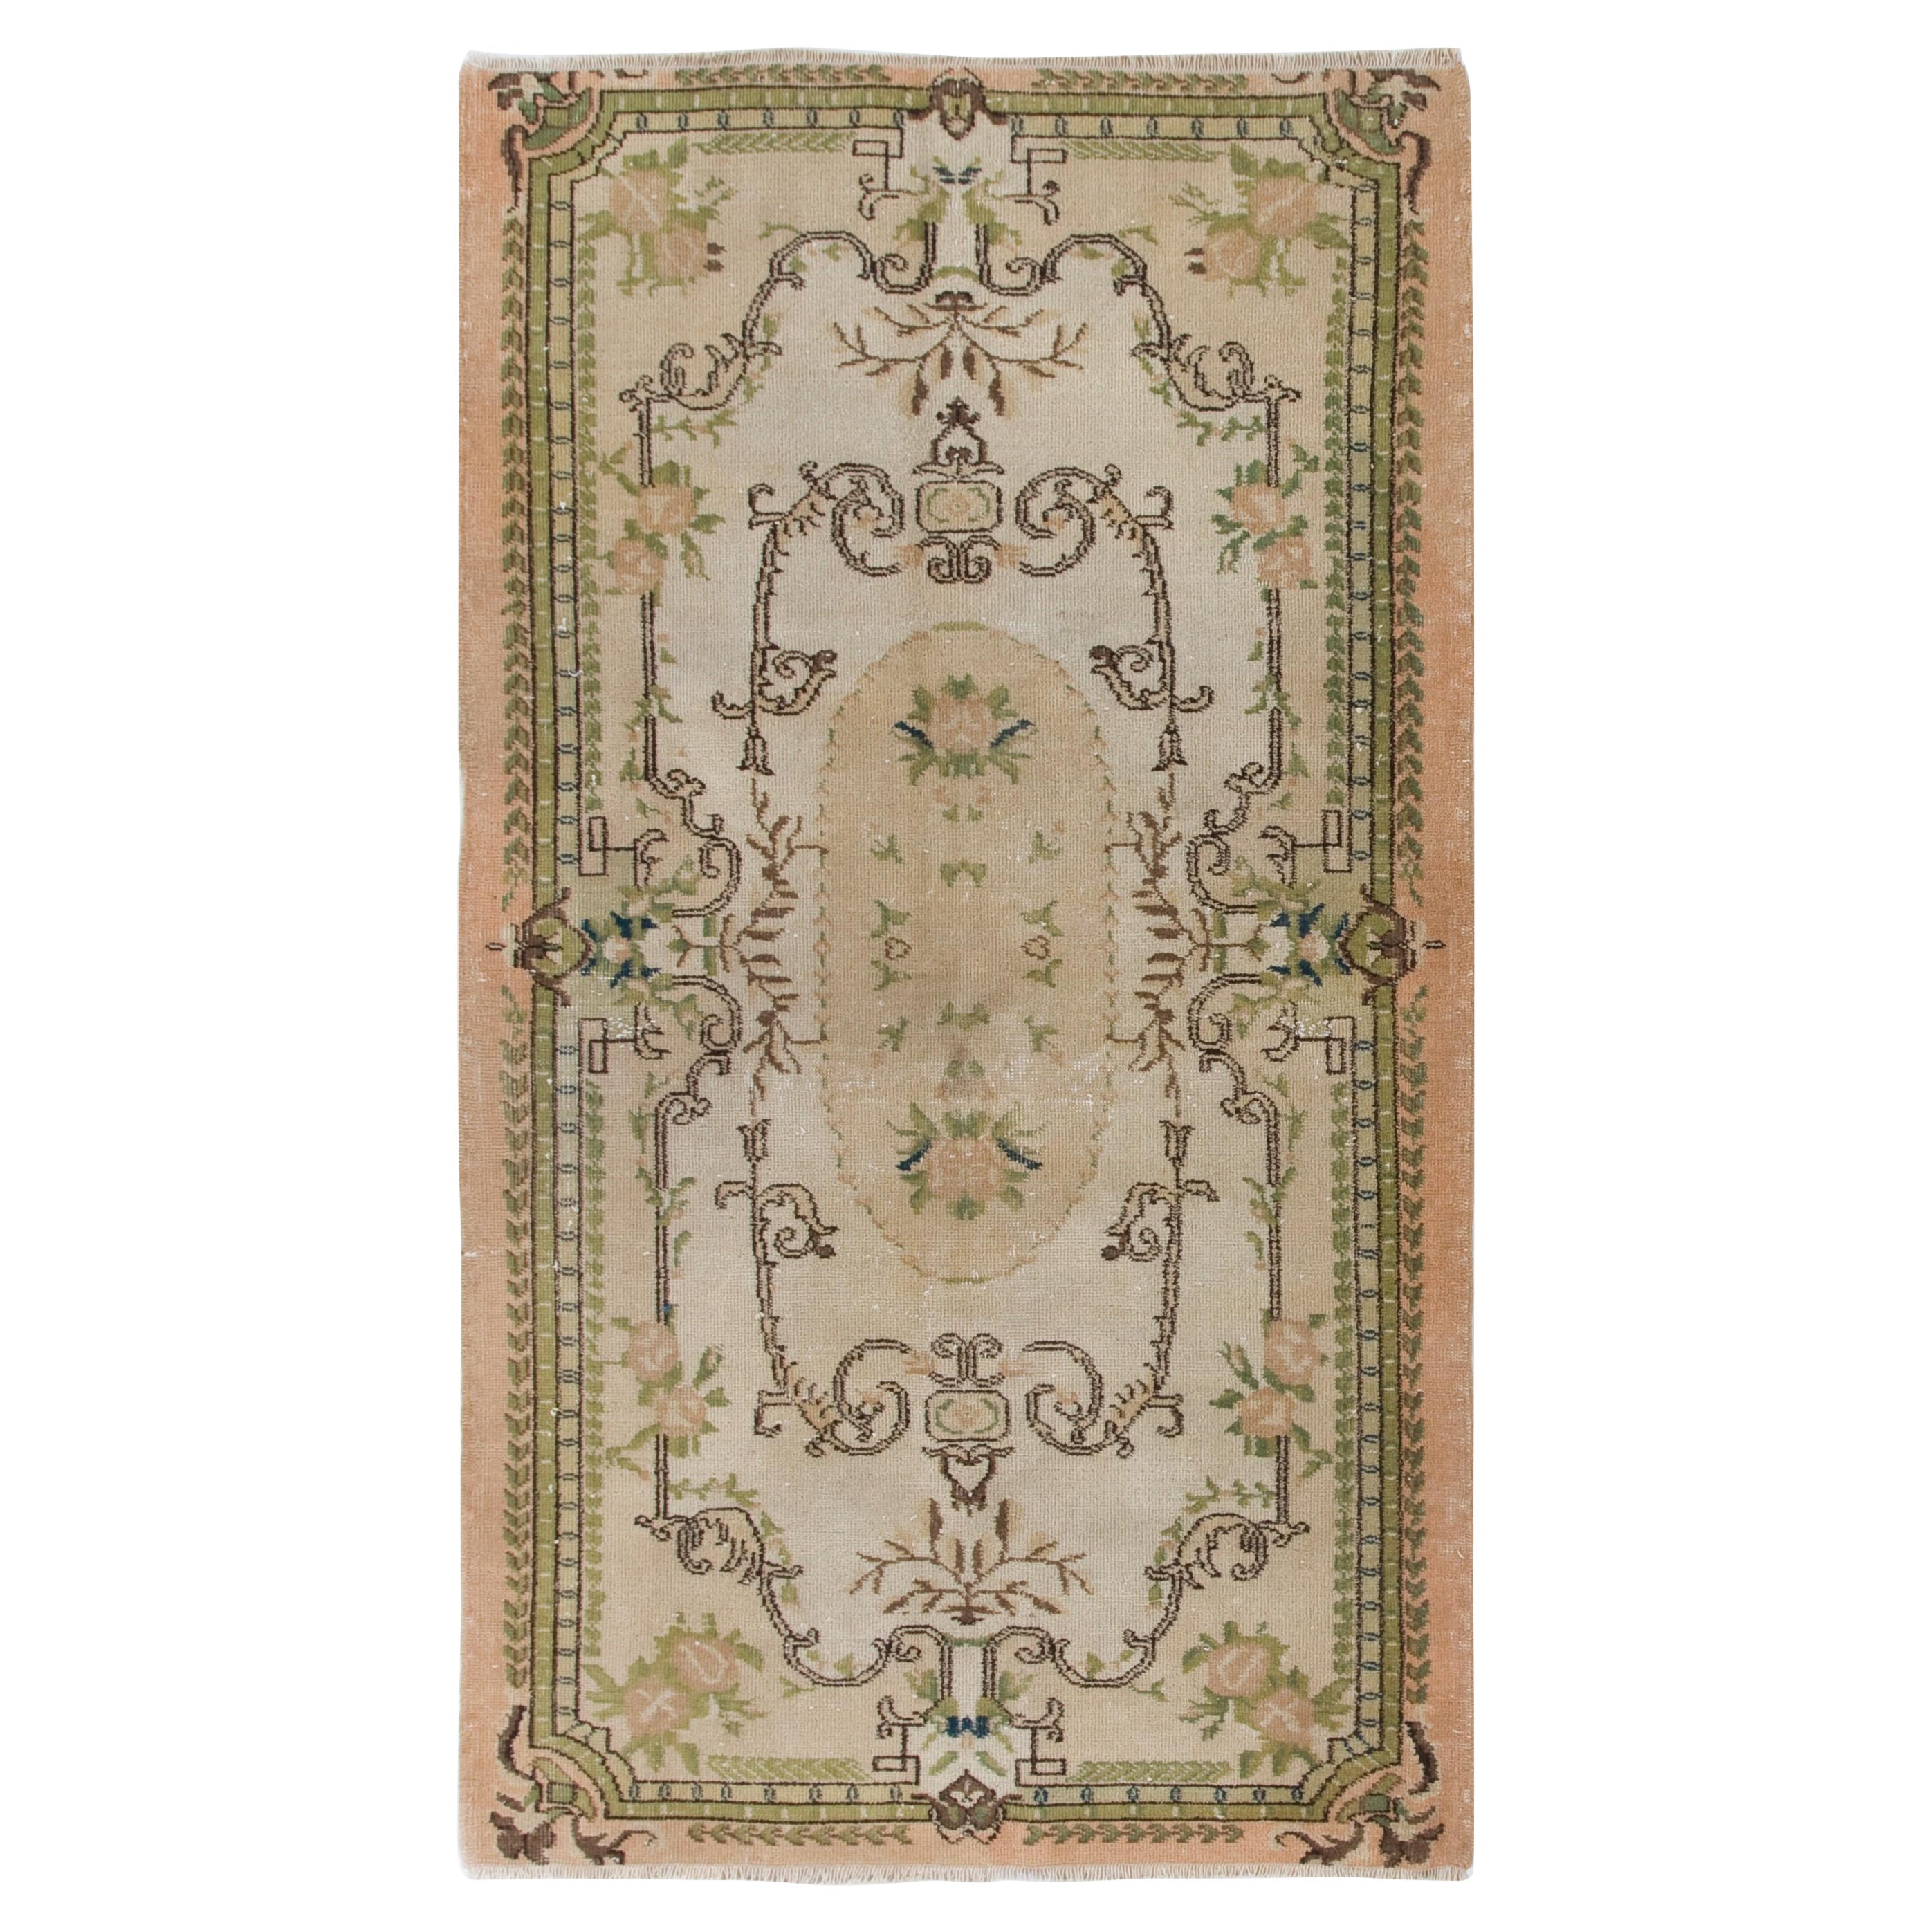 4x6.8 Ft Vintage Aubusson Inspired Turkish Handmade Wool Rug in Soft Colors